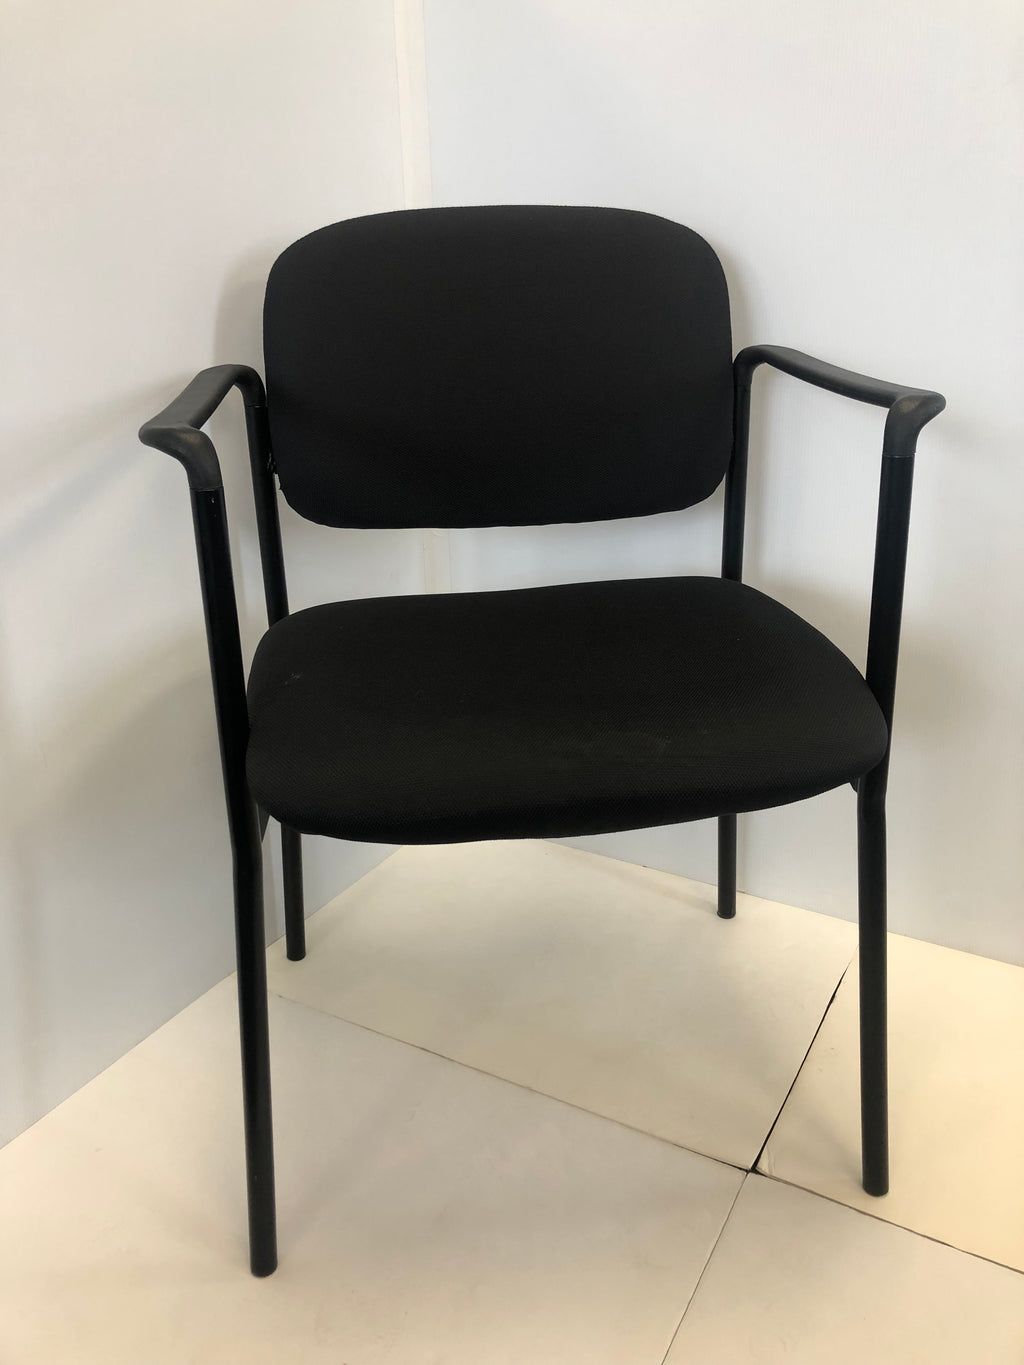 Black Fabric Stackable Steel Side Chair with Arms, NEW - Value Office Furniture & Equipment